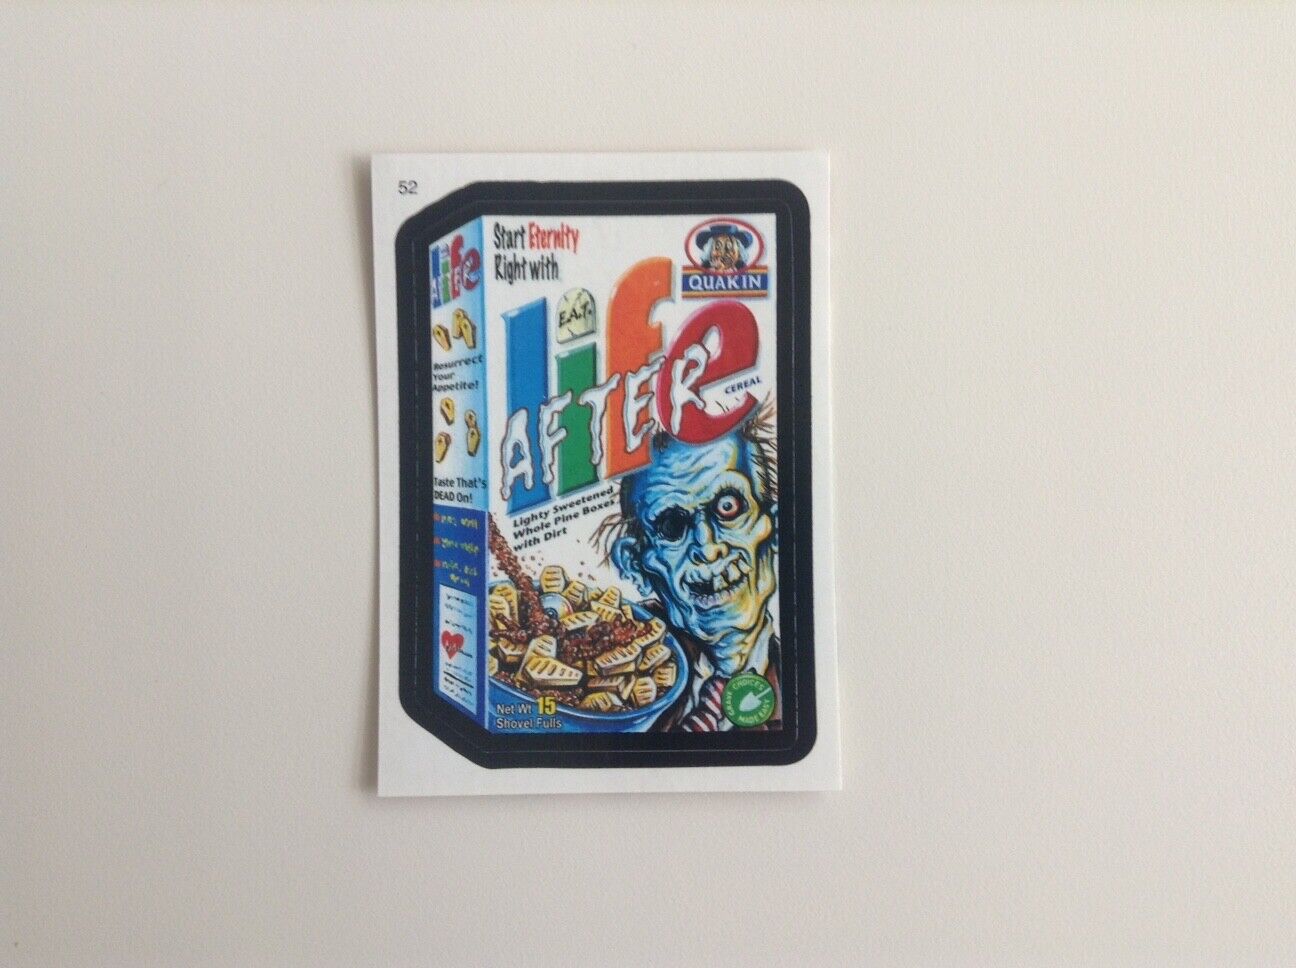 AFTER LIFE CEREAL 2006 TOPPS WACKY PACKAGES PARODY CARD, #52 NM ZOMBIE MONSTER 